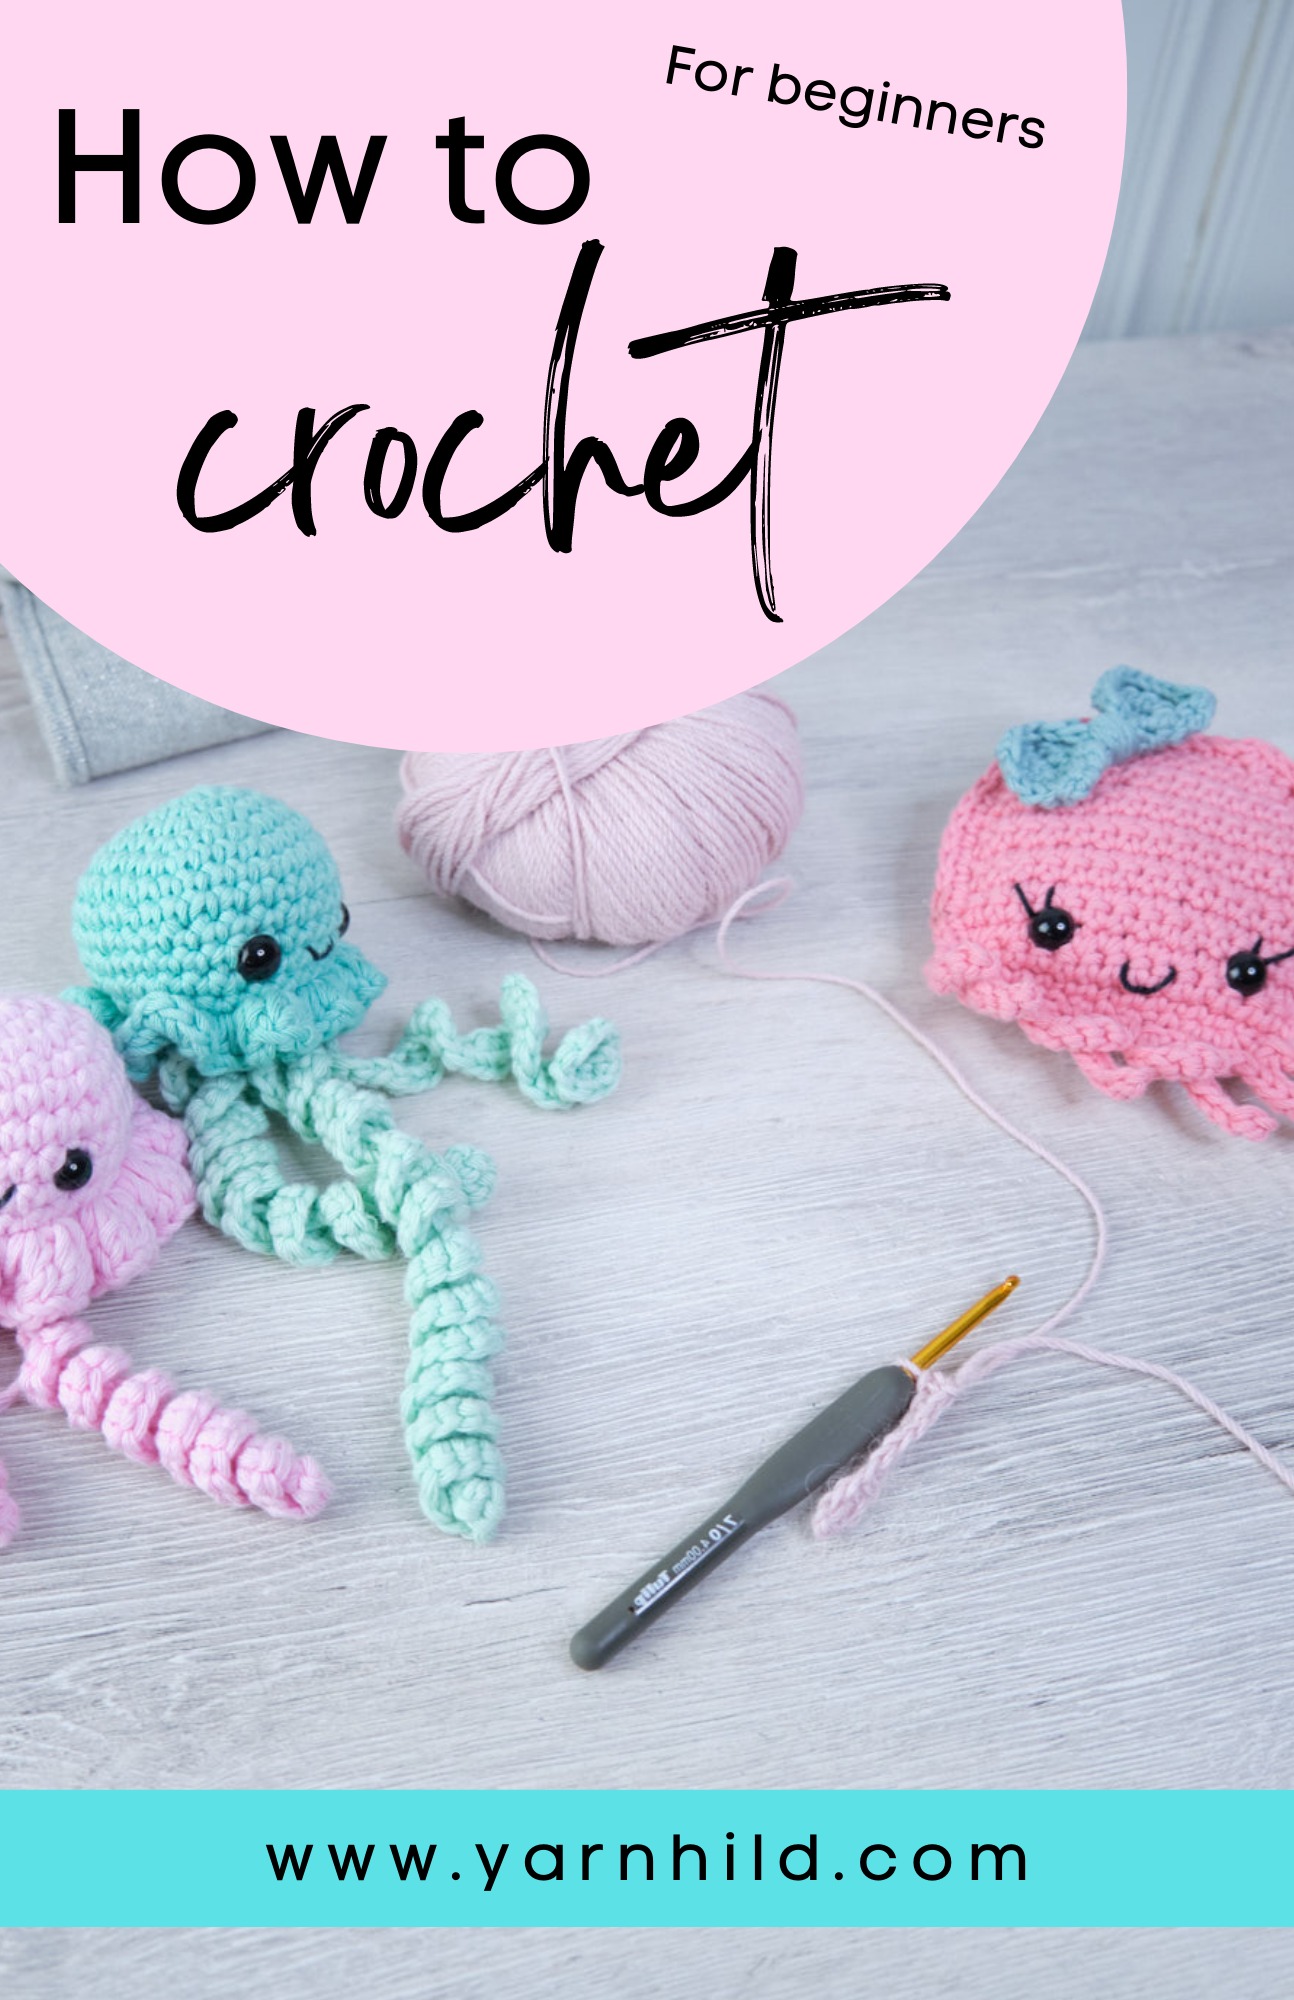 How to Crochet for Beginners - Everything you need to know in one